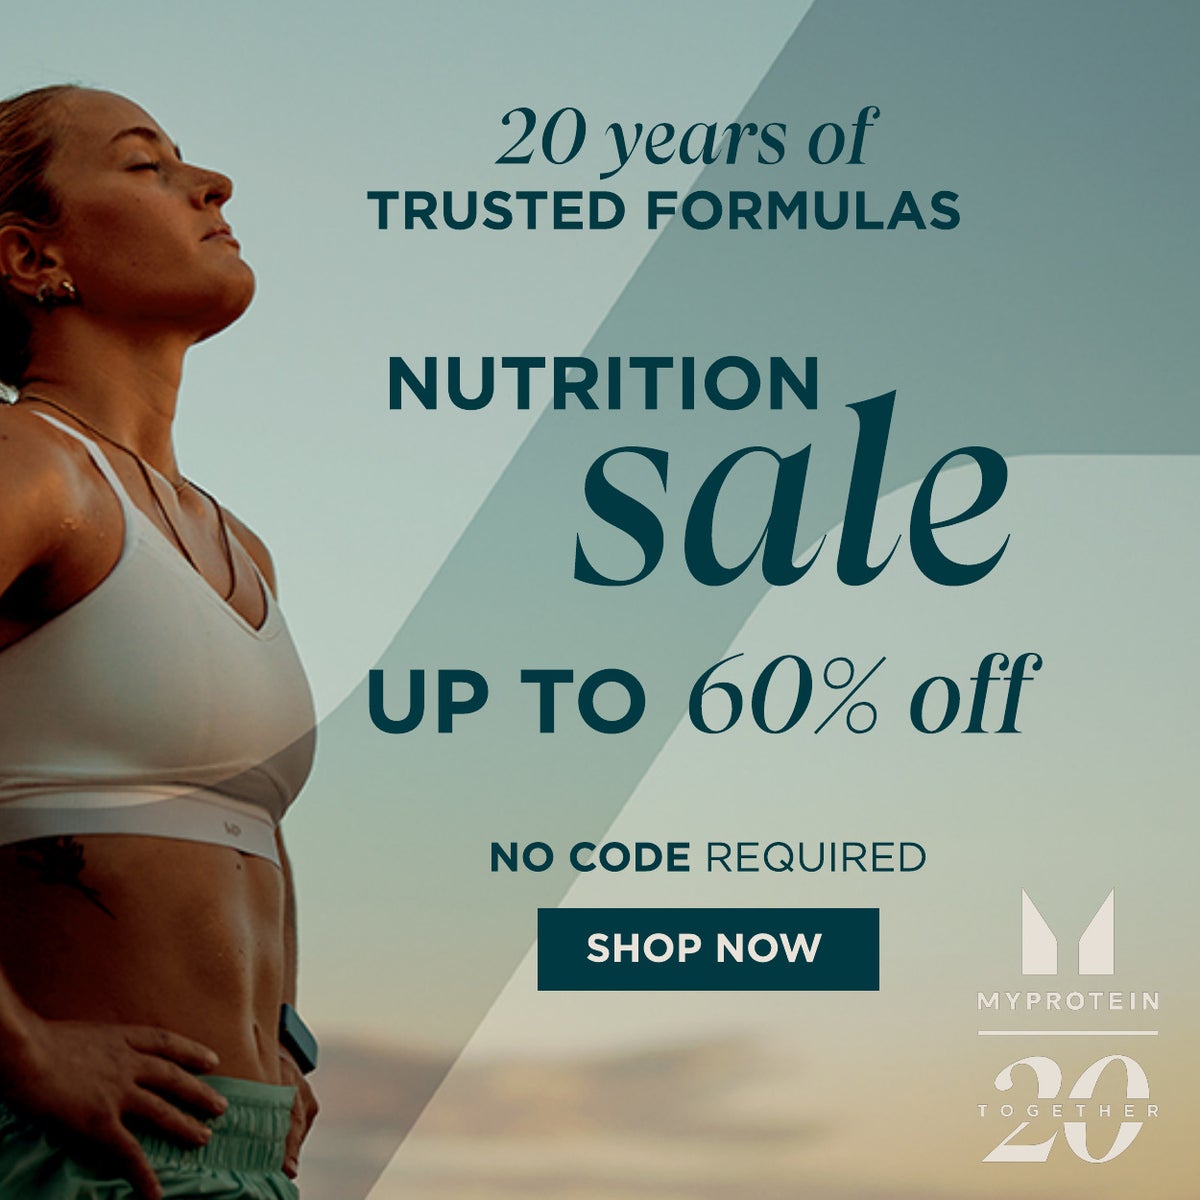 Nutrition sale. Up to 60% off * Discount applies to product rrp at basket. shop now.